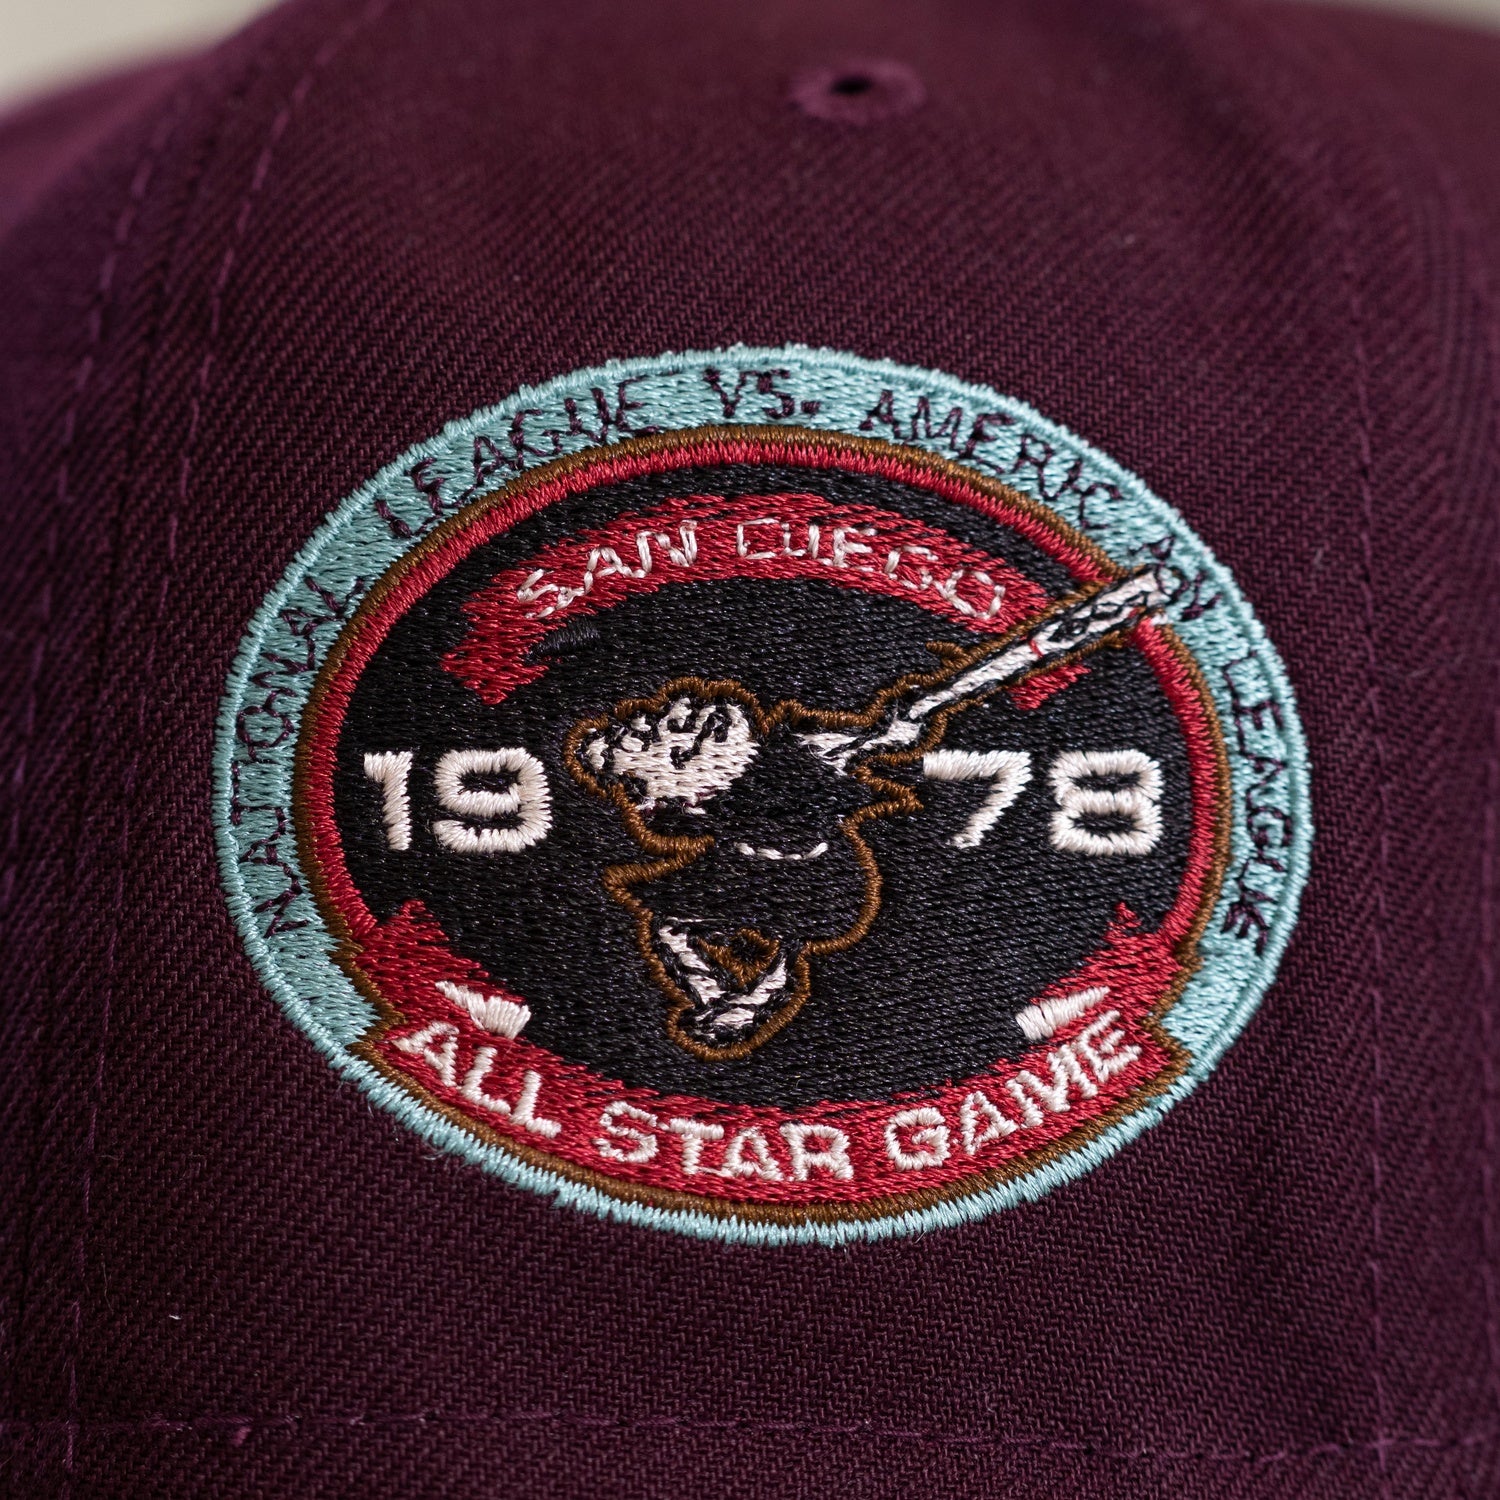 San Diego Padres Brown with Pink UV and Sweatband 1978 All Star Game  Sidepatch 5950 Fitted Hat – Fan Treasures